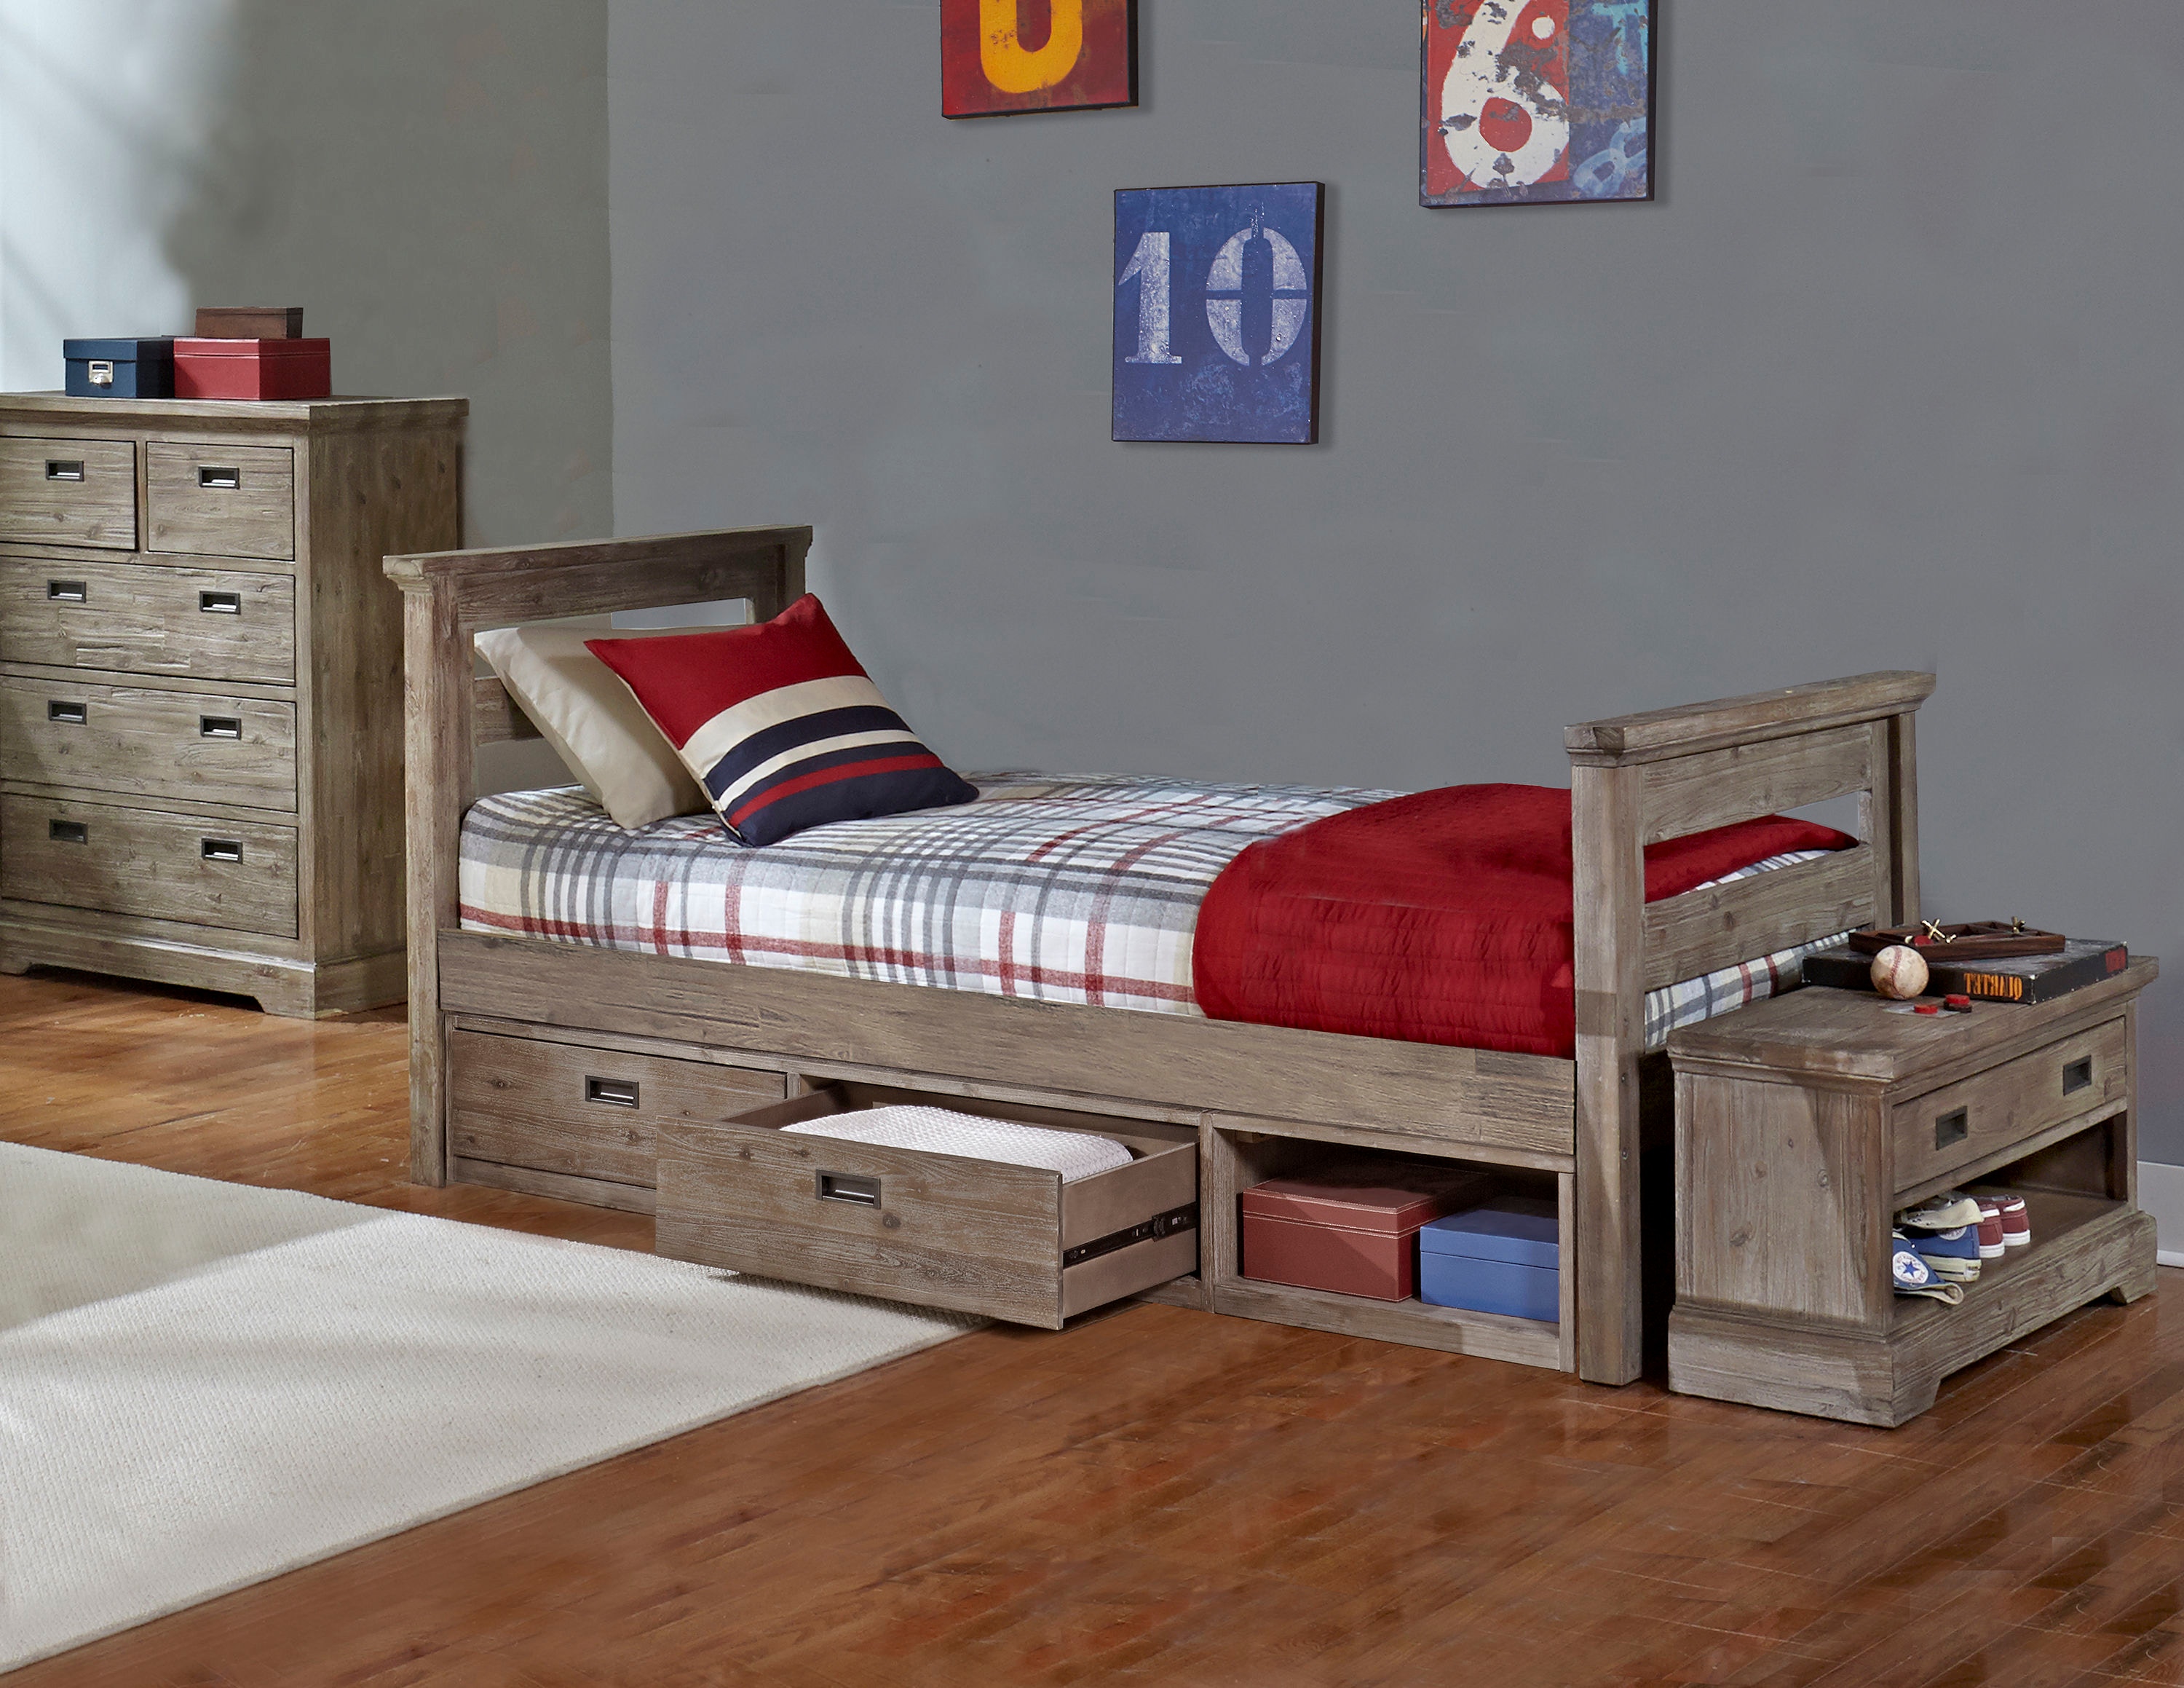 twin bed frames for kids